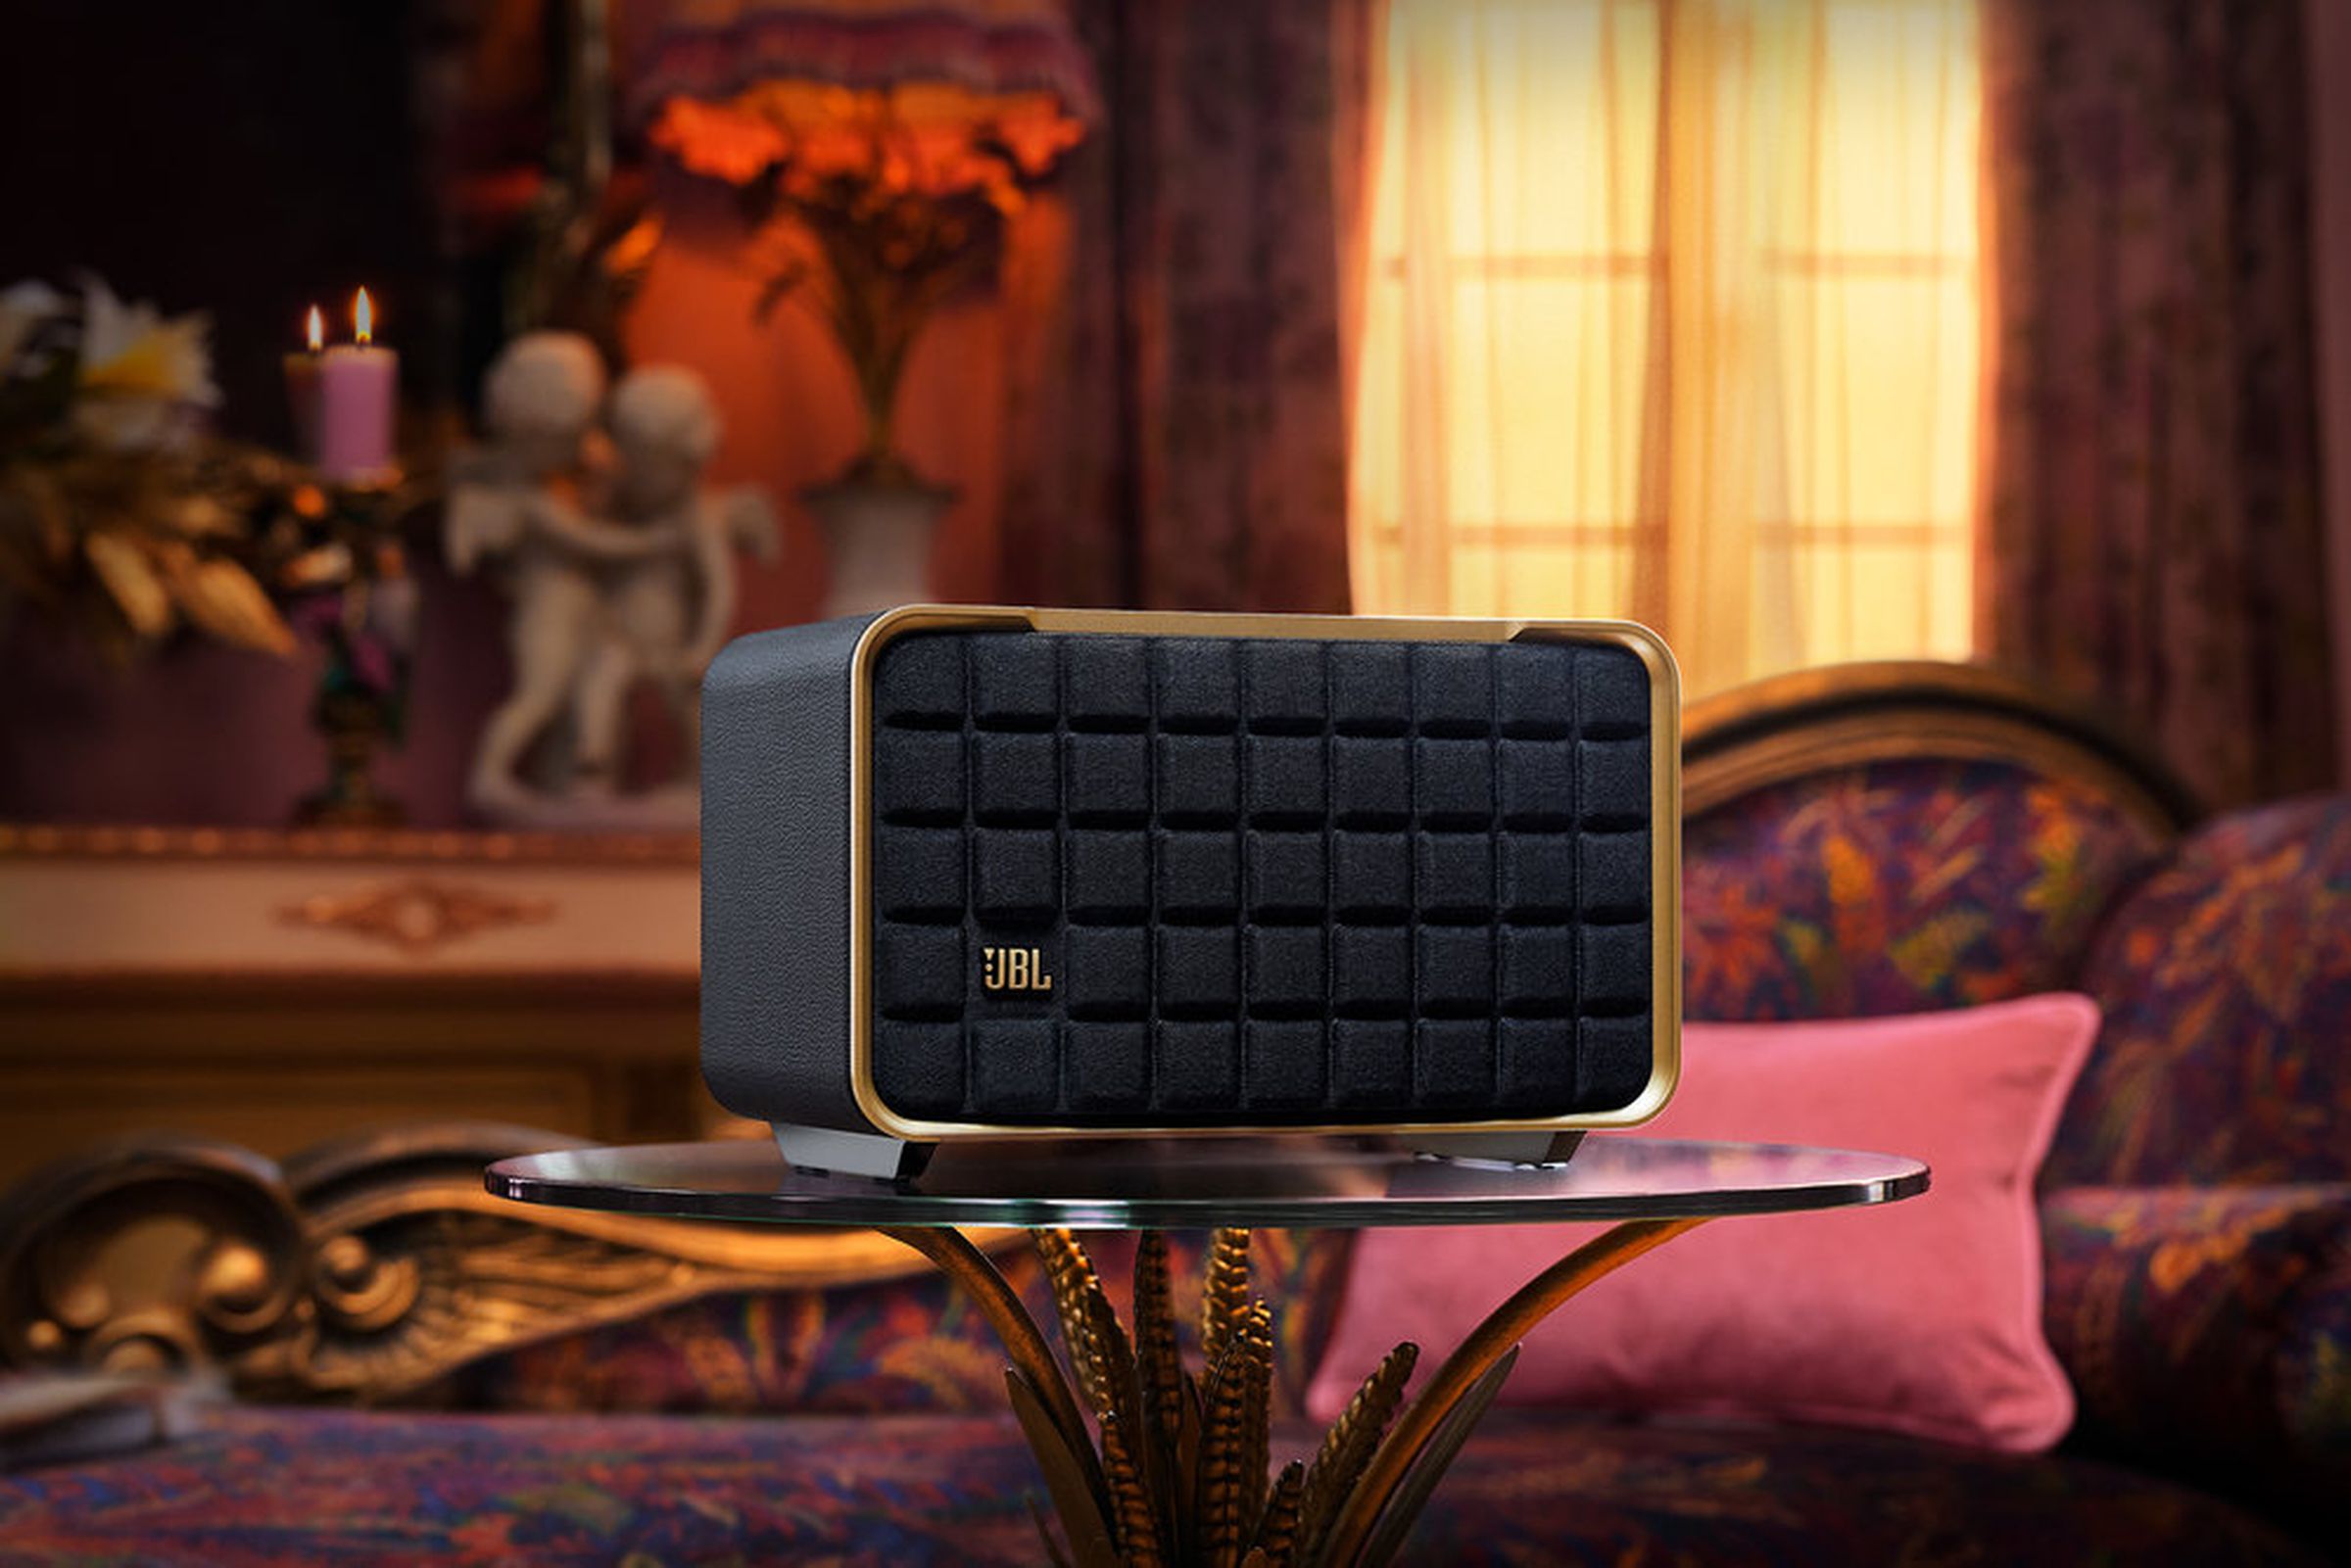 The JBL Authentics 200 is a retro-style speaker inspired by the 1970s JBL L100 speaker but with some new tech on board.